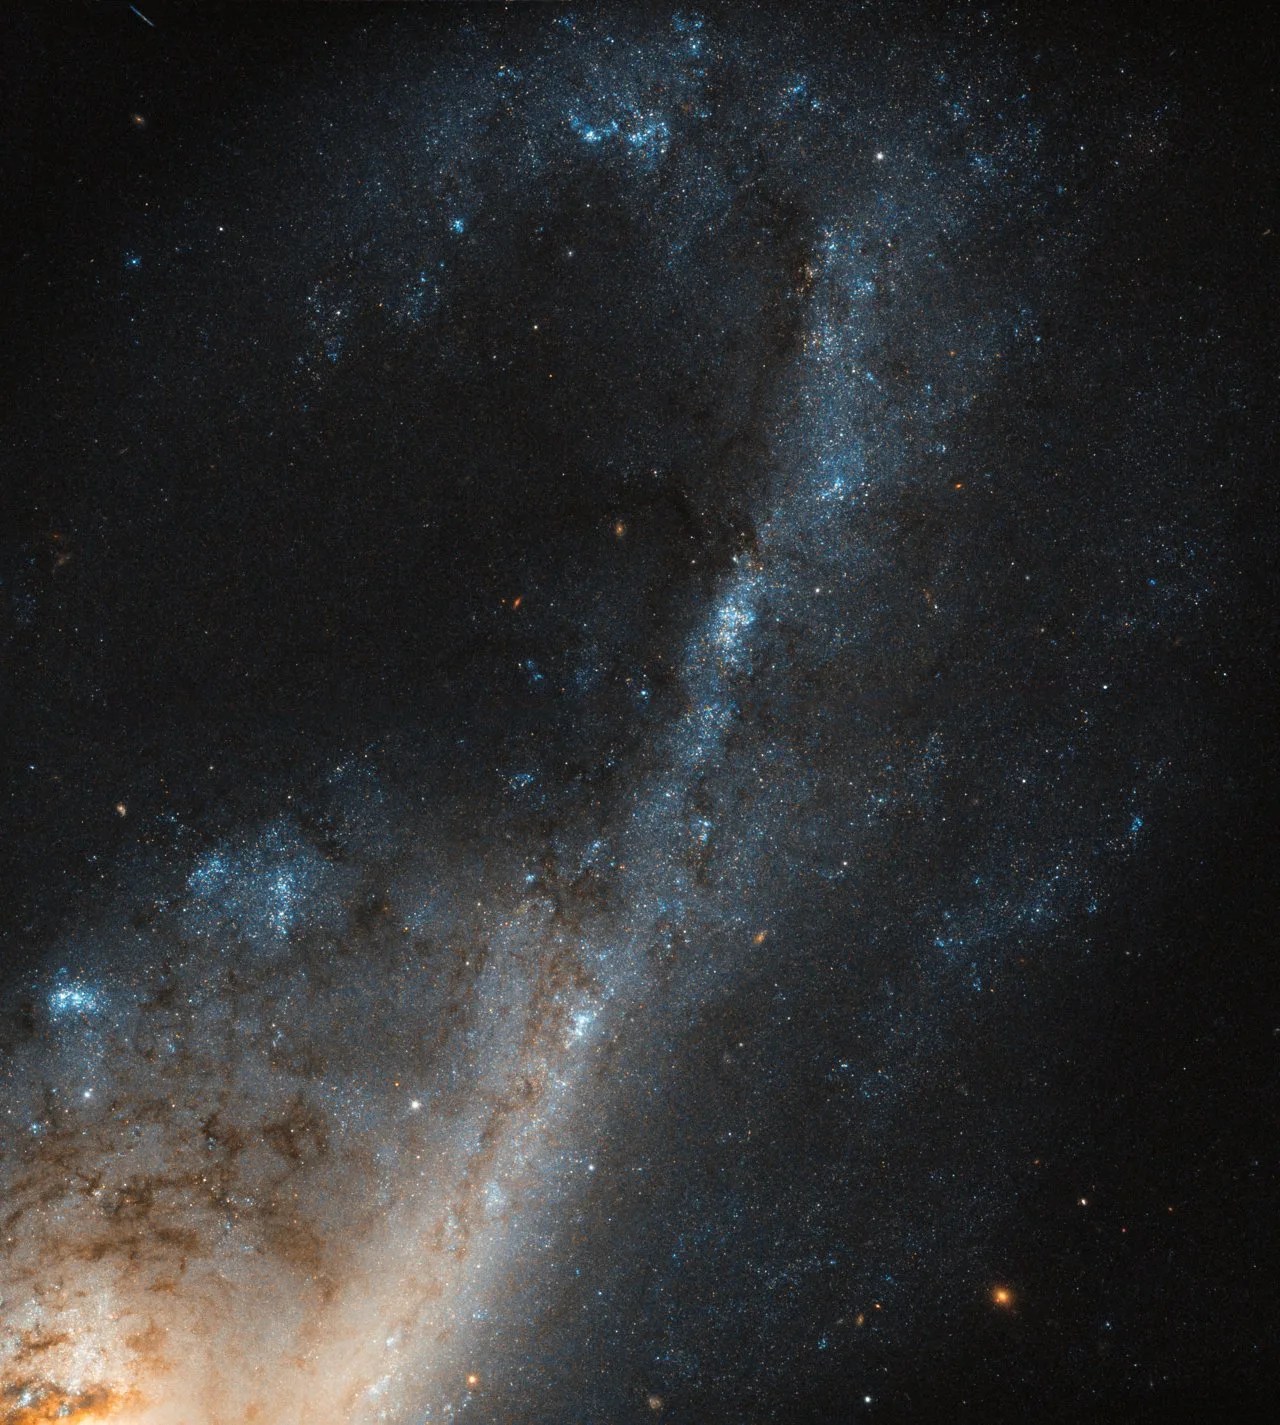 Closup of spiral galaxy arm with blue clusters